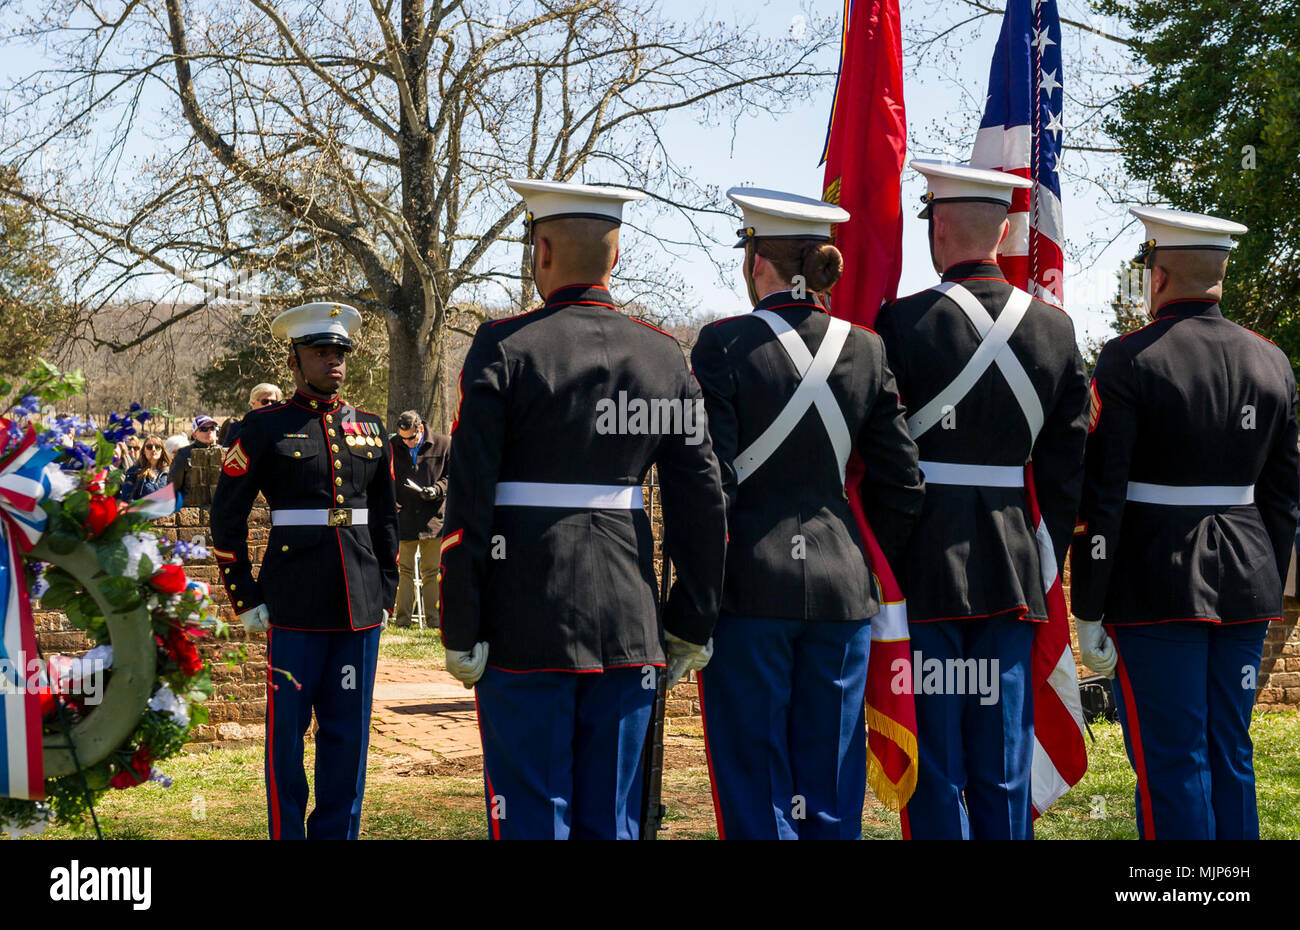 U.S. Marines with Marine Corps Base Quantico Color Guard stand at attention during the Presidential wreath laying ceremony held to honor the 4th President of the United States, James Madison, also known as the Father of the Constitution, at his home at Montpelier, Orange, Va., March 16, 2018. This event was held in commemoration of the 267th anniversary of the birth of Madison, born in 1751, and has also been decreed as James Madison Appreciation Day for the Commonwealth of Virginia. Armed Forces and civilians displaying courage bravery dedication commitment and sacrifice Stock Photo